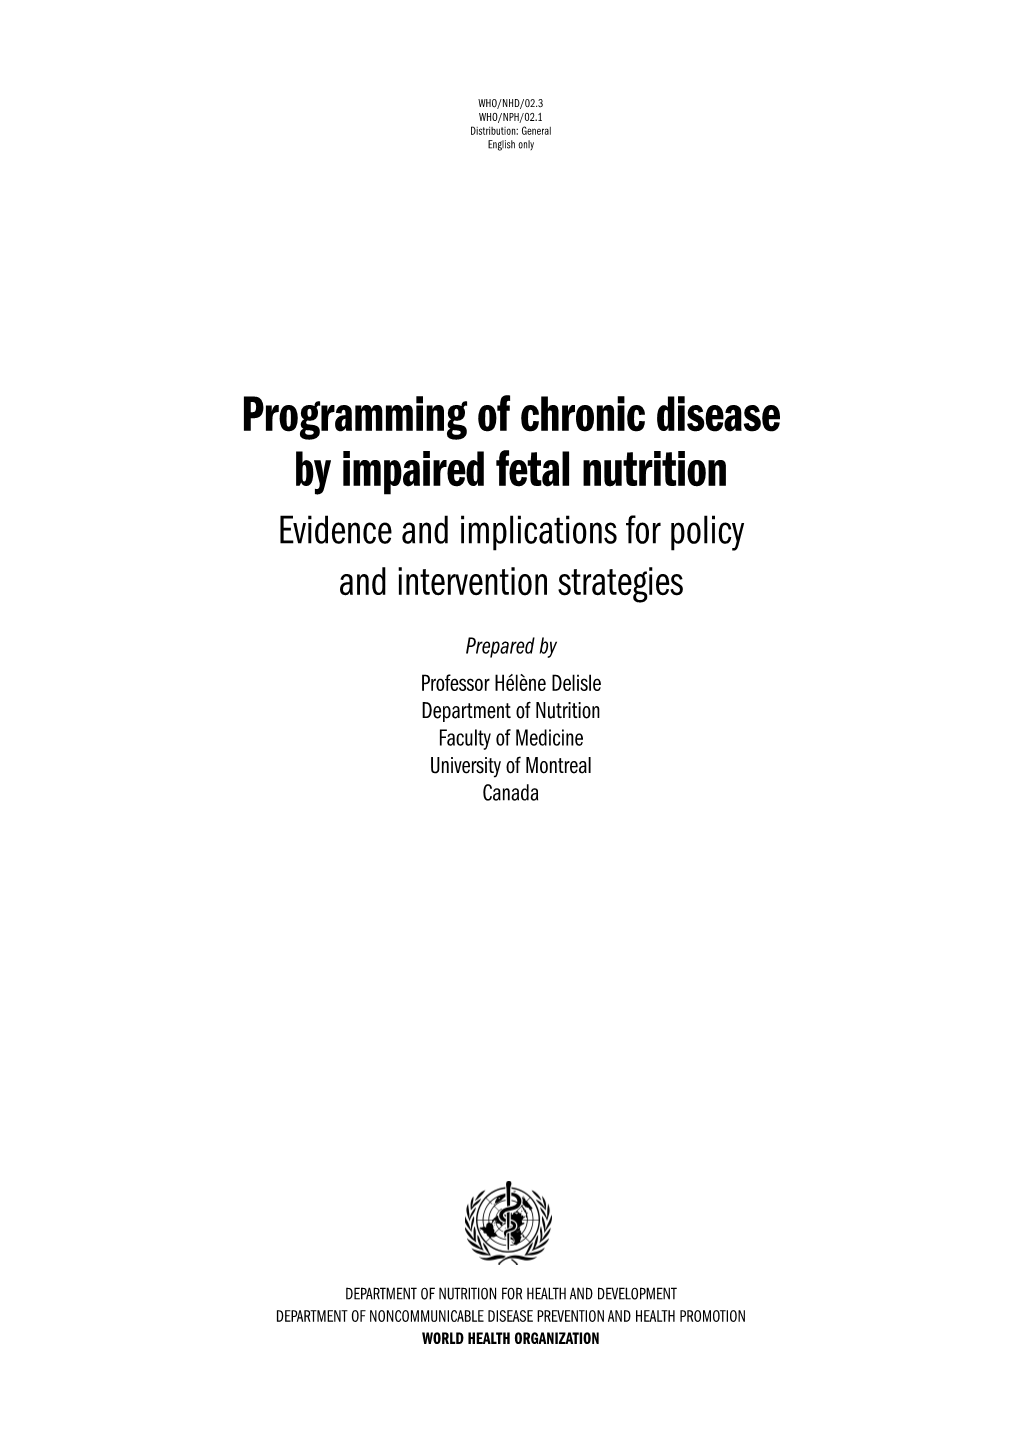 Programming of Chronic Disease by Impaired Fetal Nutrition Evidence and Implications for Policy and Intervention Strategies